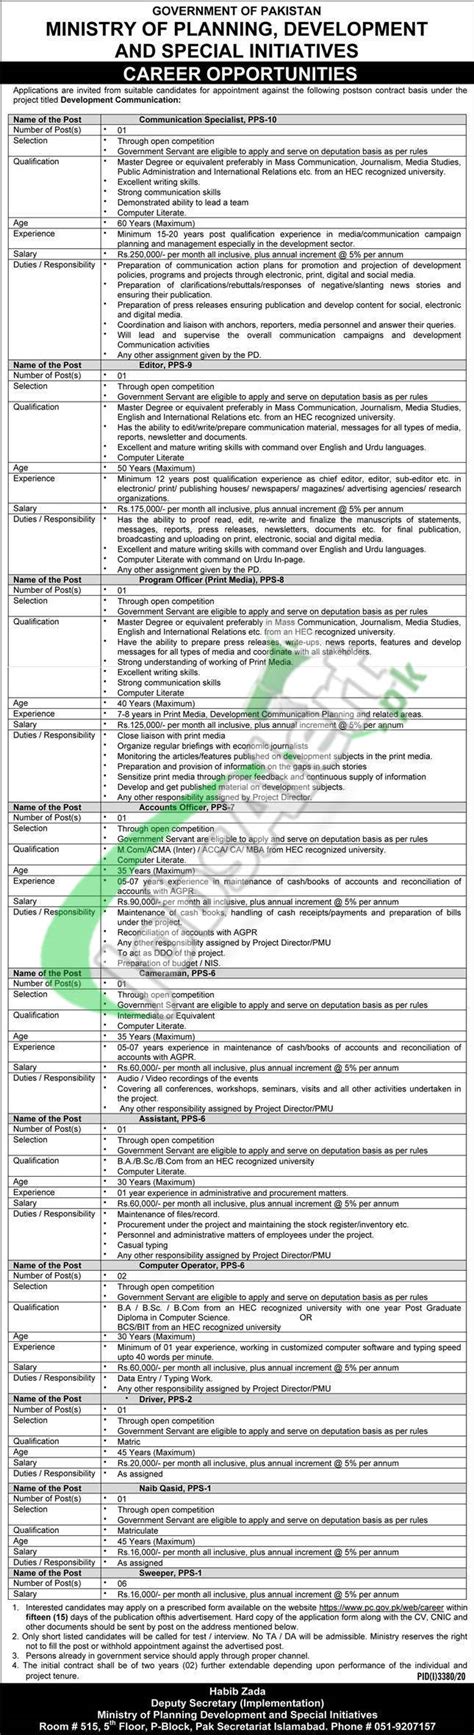 Ministry Of Planning Development And Special Initiatives Jobs Application